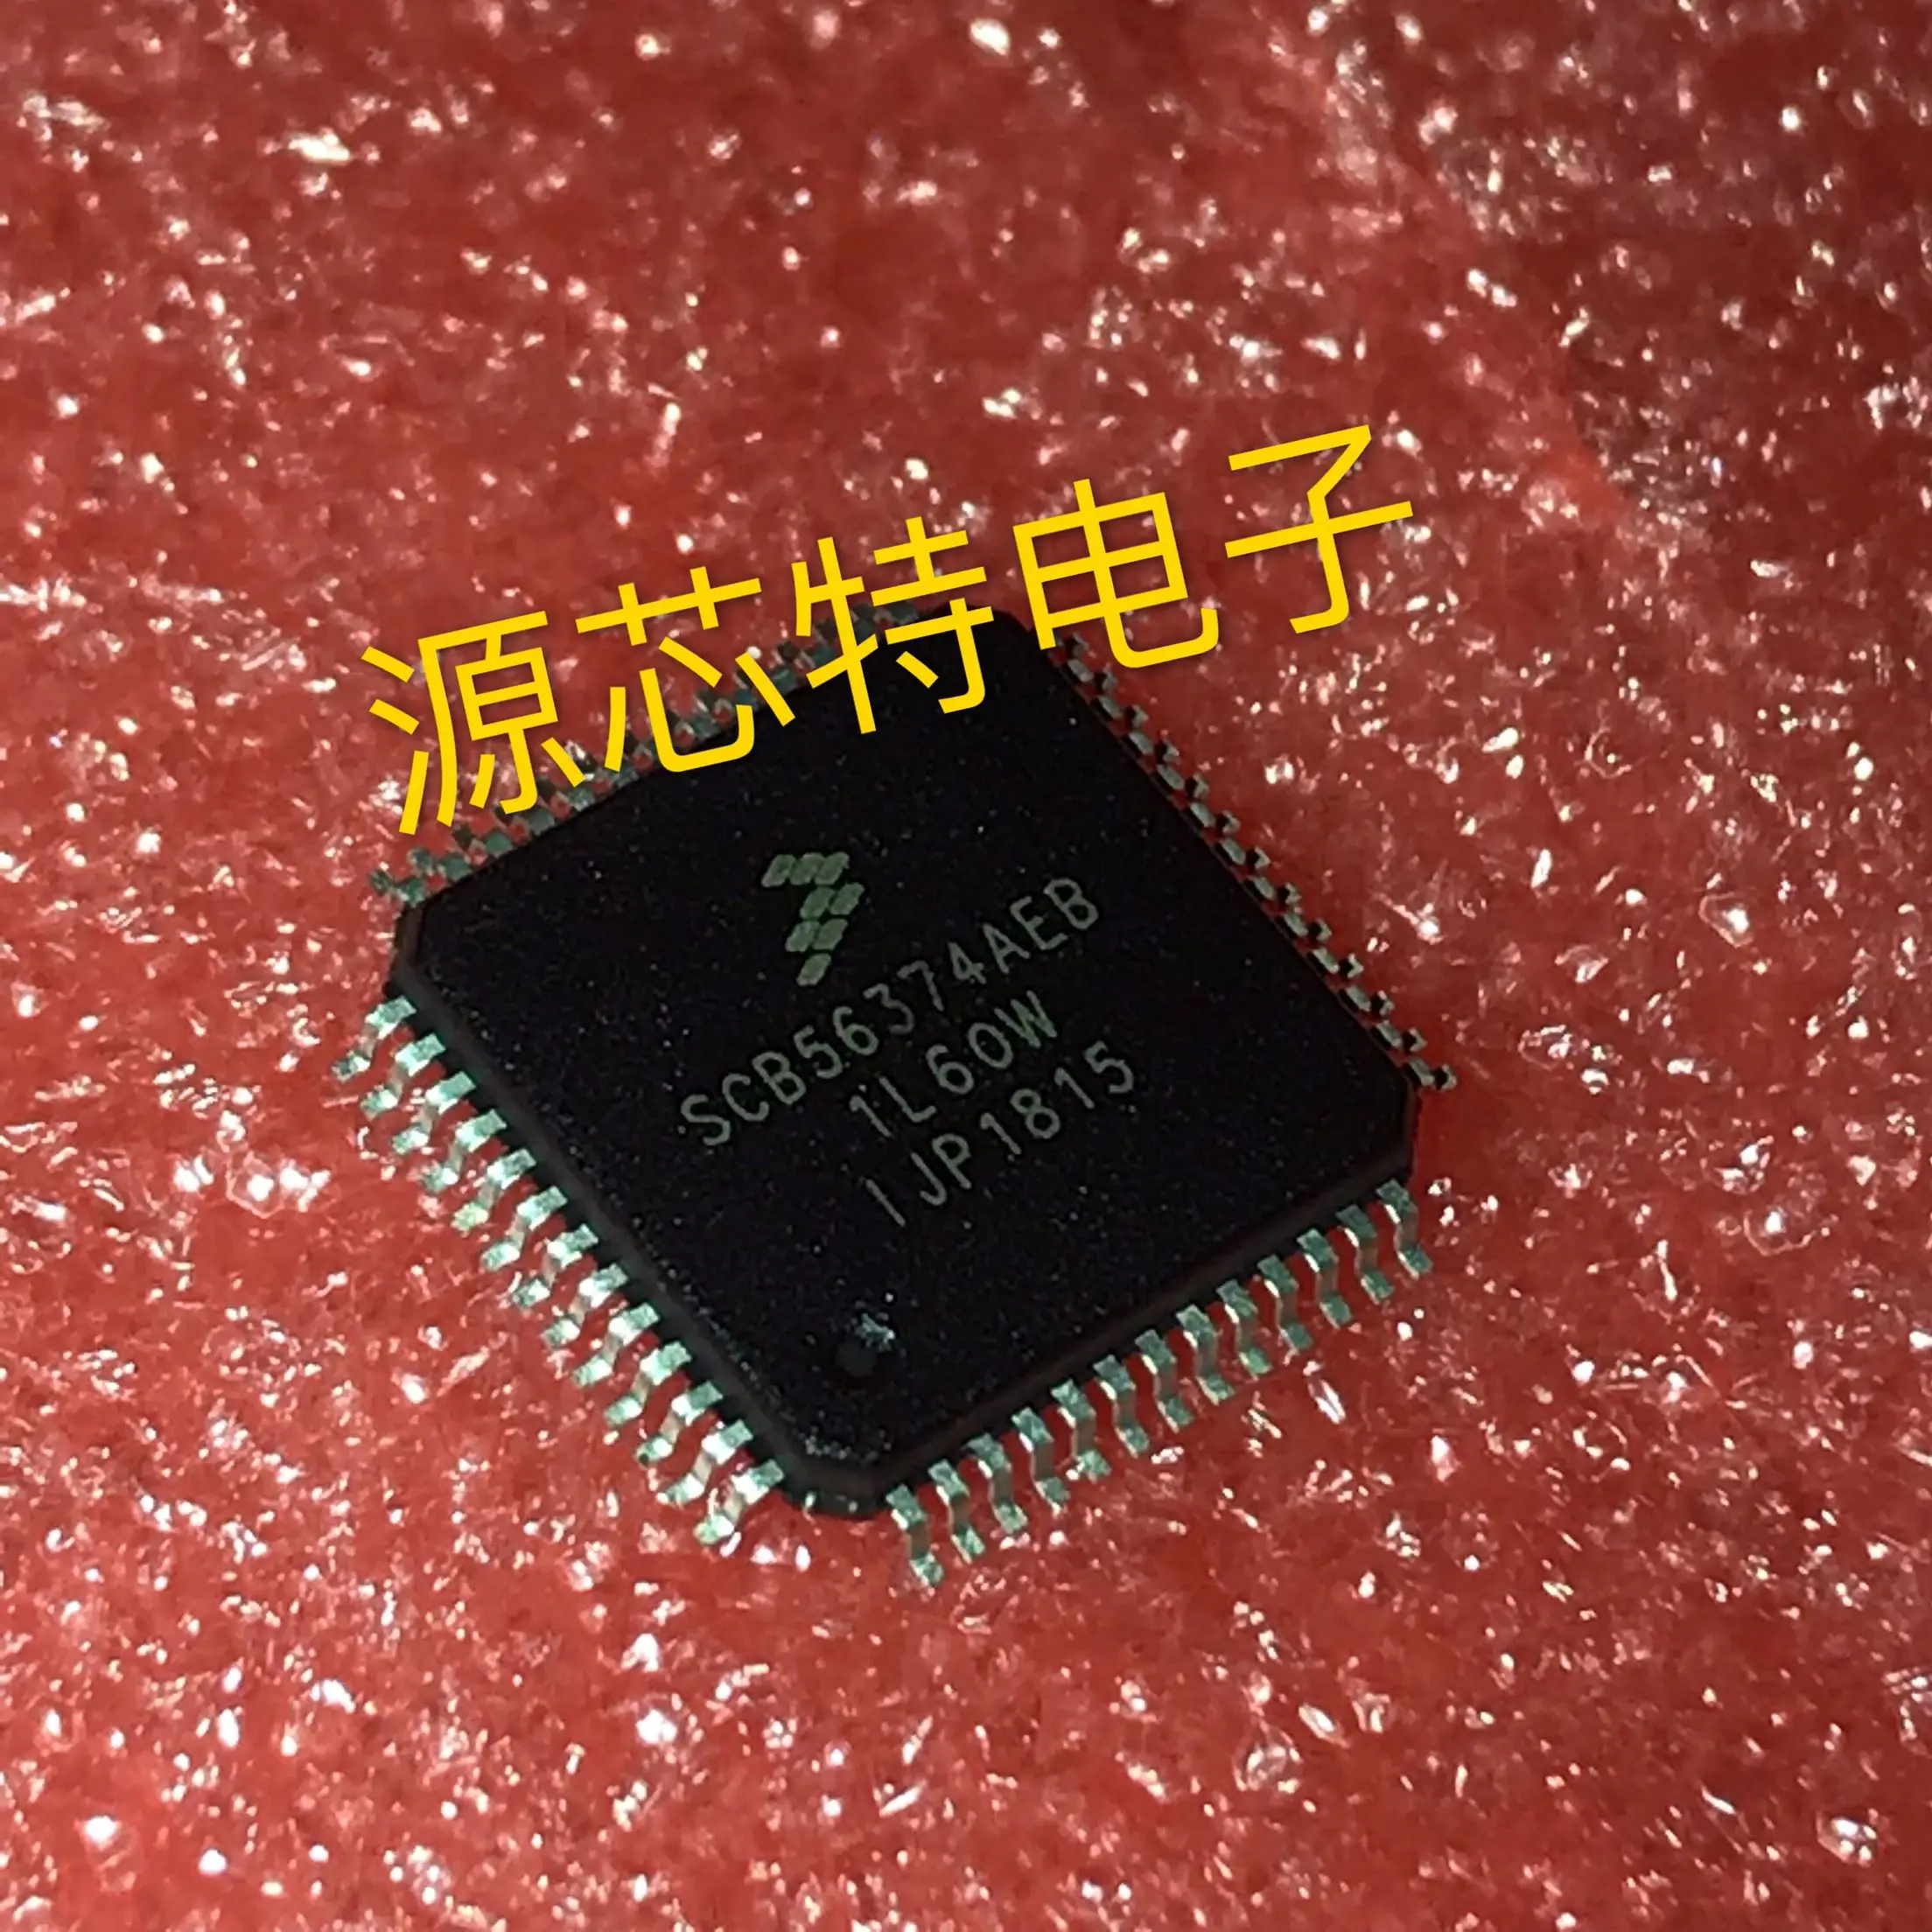 

New Original High Quality Automotive Ic Chip 1pcs Scb56374aeb Scb56374 1l60w Auto For Audio Cpu Qfp-52 Car Ic Chips Ic Chipset O